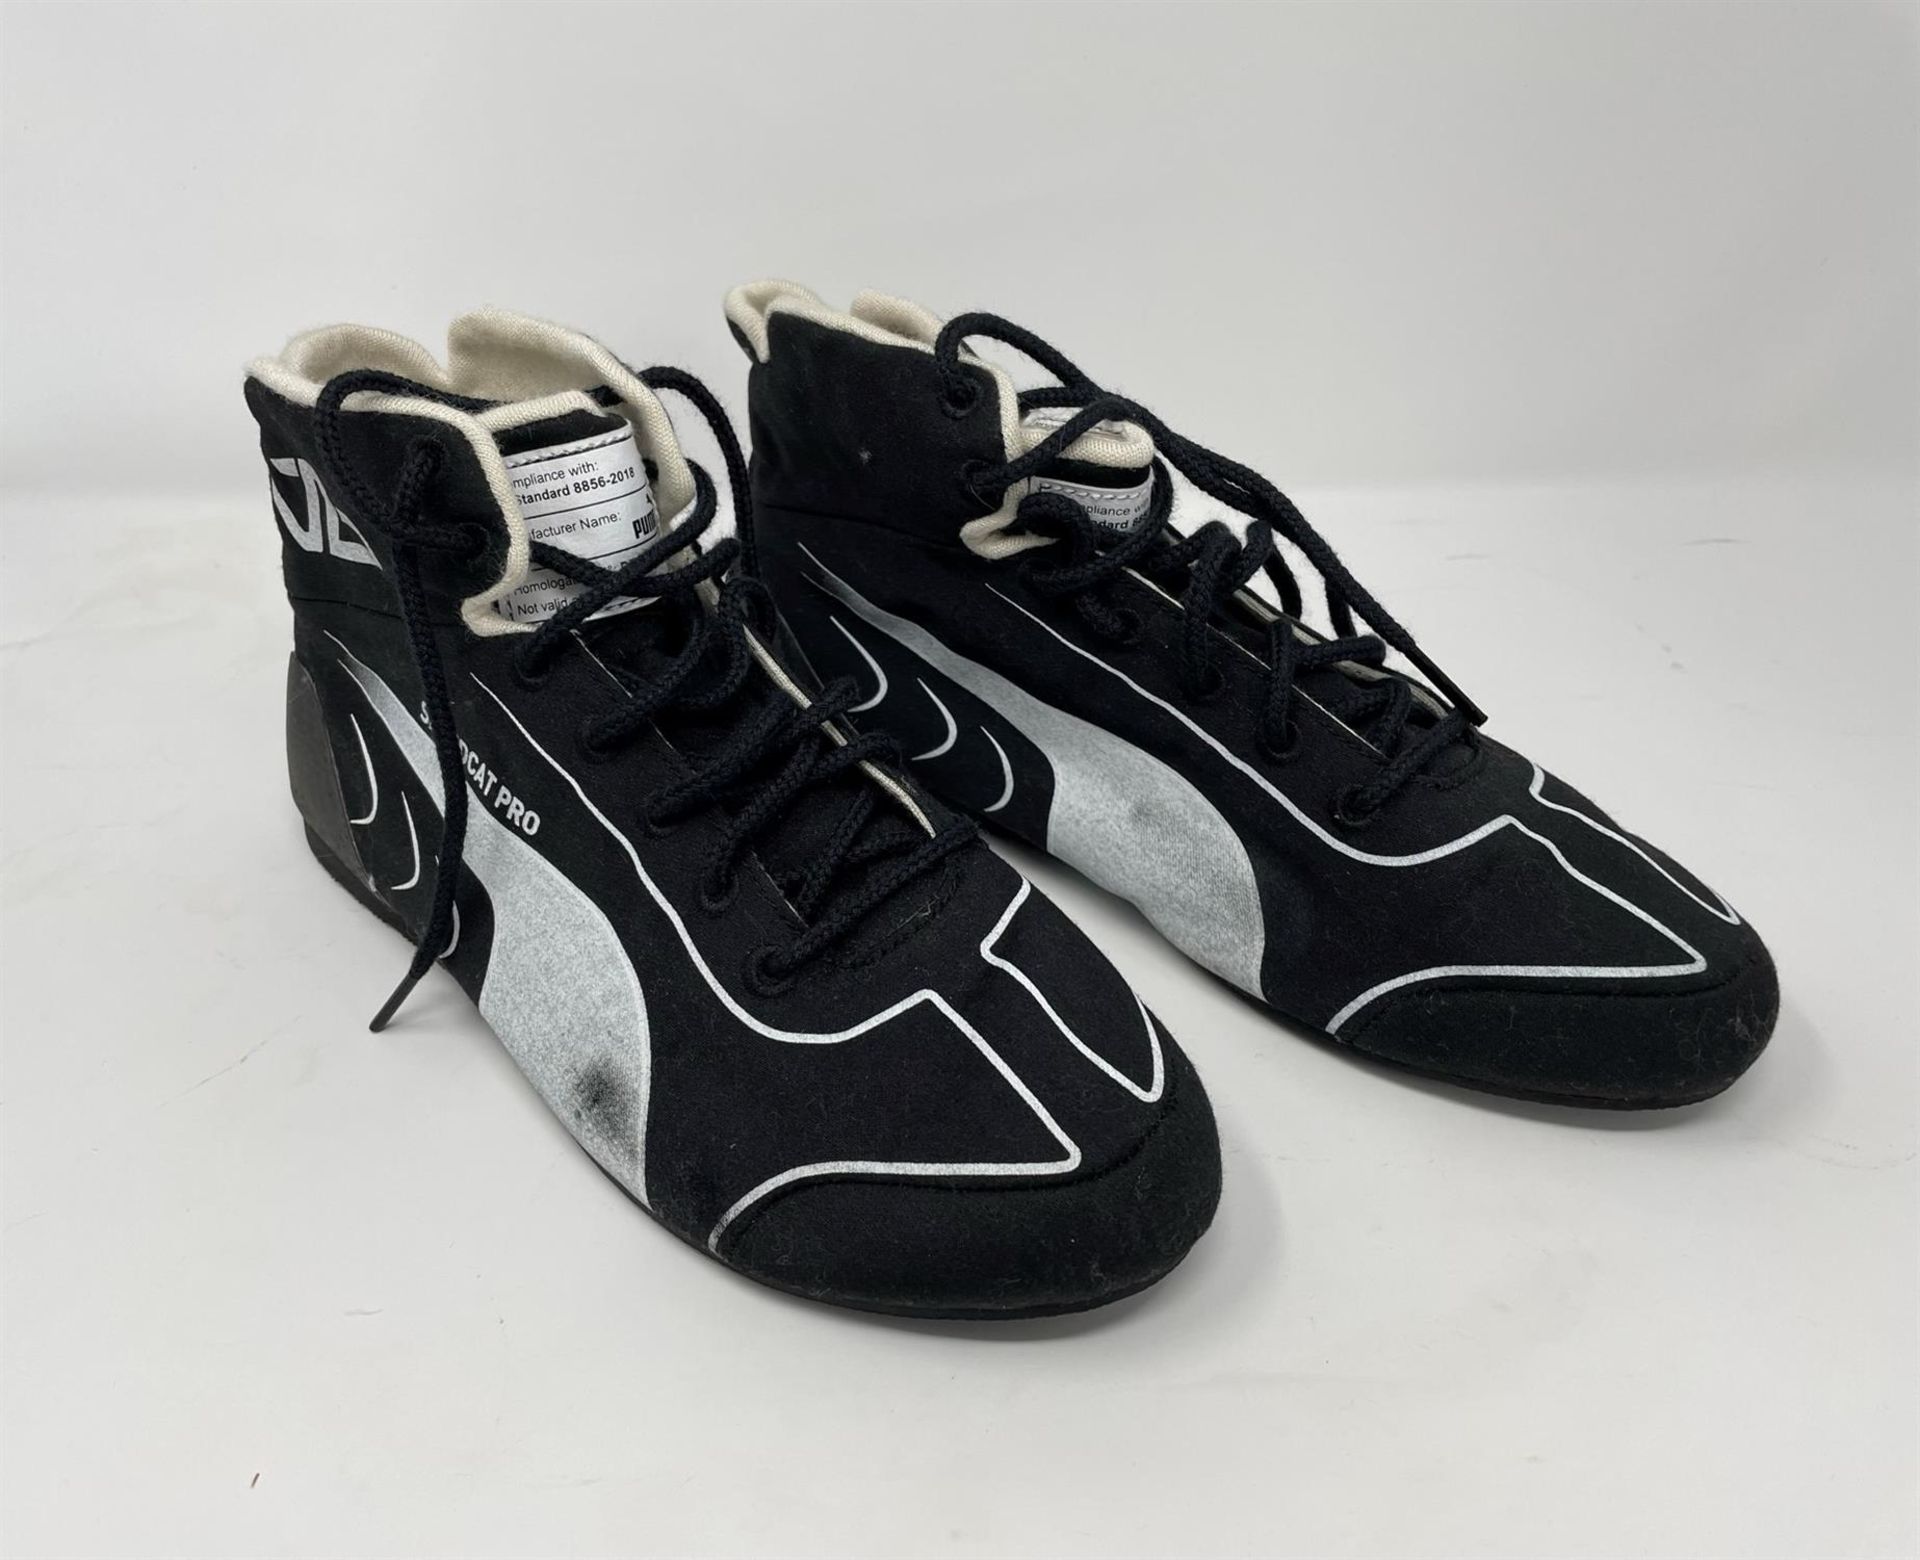 Charity Lot: Valtteri Bottas' Race Boots worn at the 2020 Imola GP Weekend - Image 2 of 8